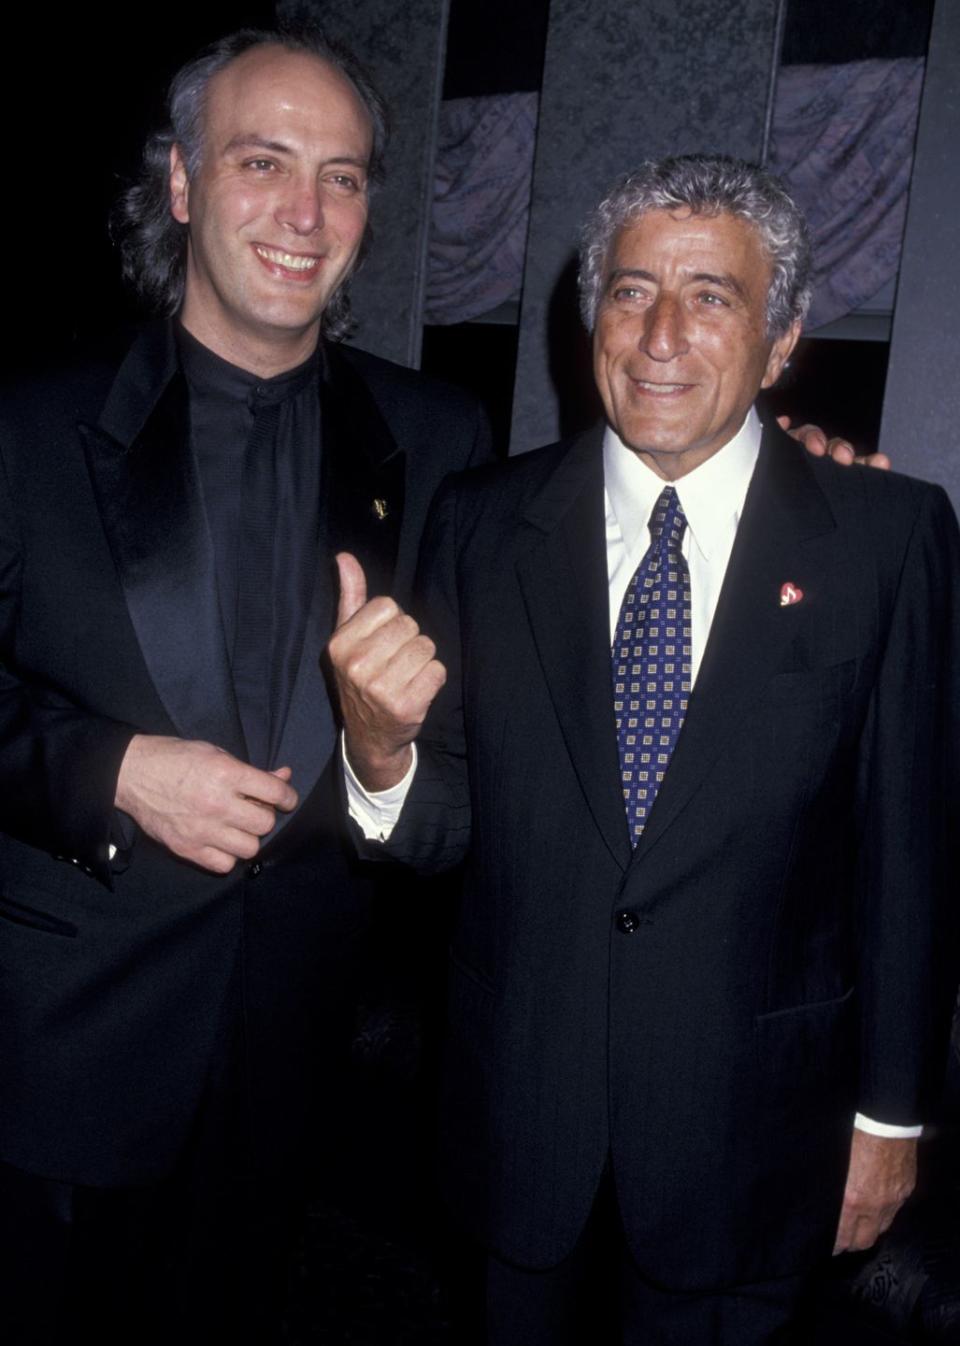 danny bennett and tony bennett stand next to each other and smile, tony raises a thumbs up toward danny, both men wear black suit jackets, tony also wears a blue patterned tie